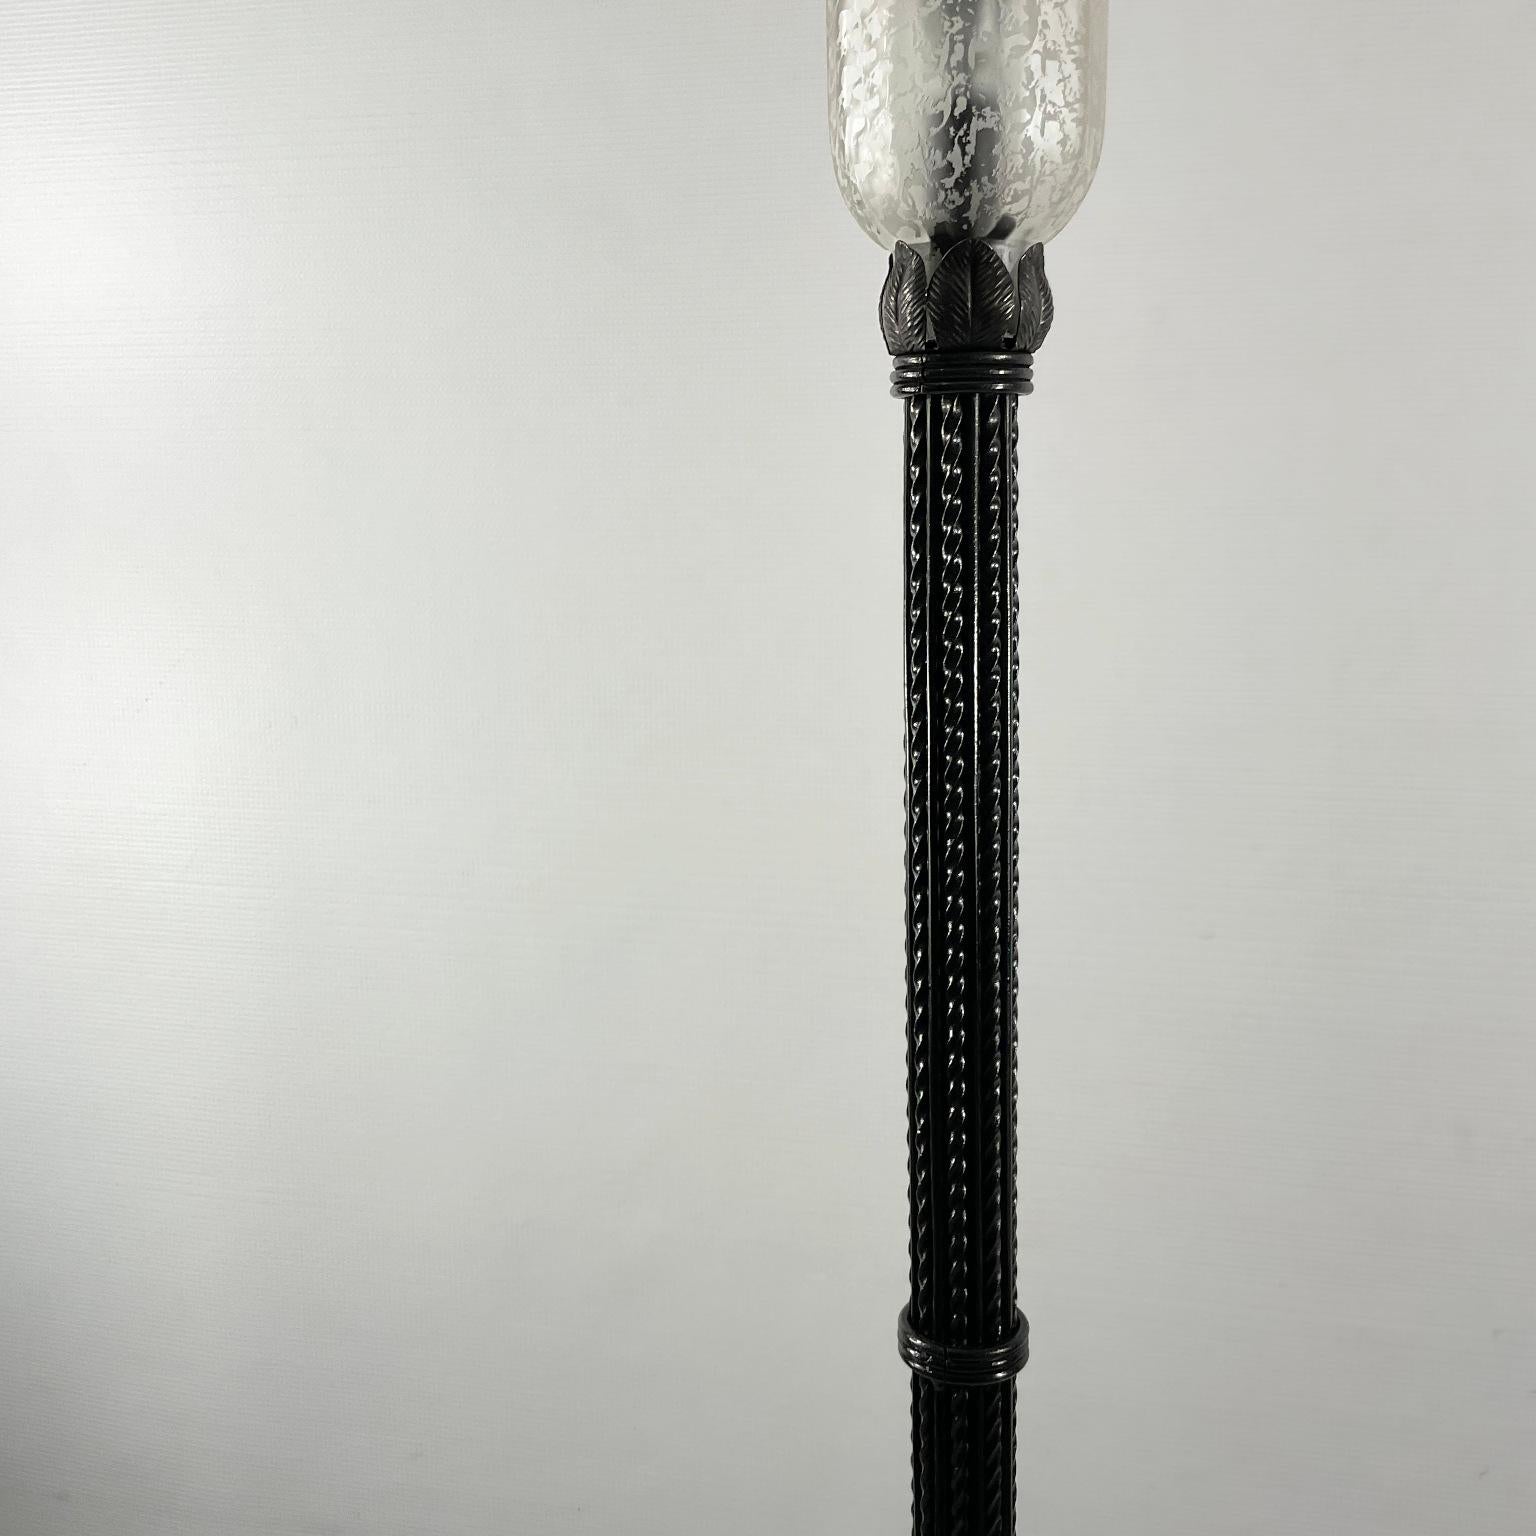 Art Glass 1920s French Art Deco Wrought Iron Floor Lamp with Frosted Glass Shade For Sale